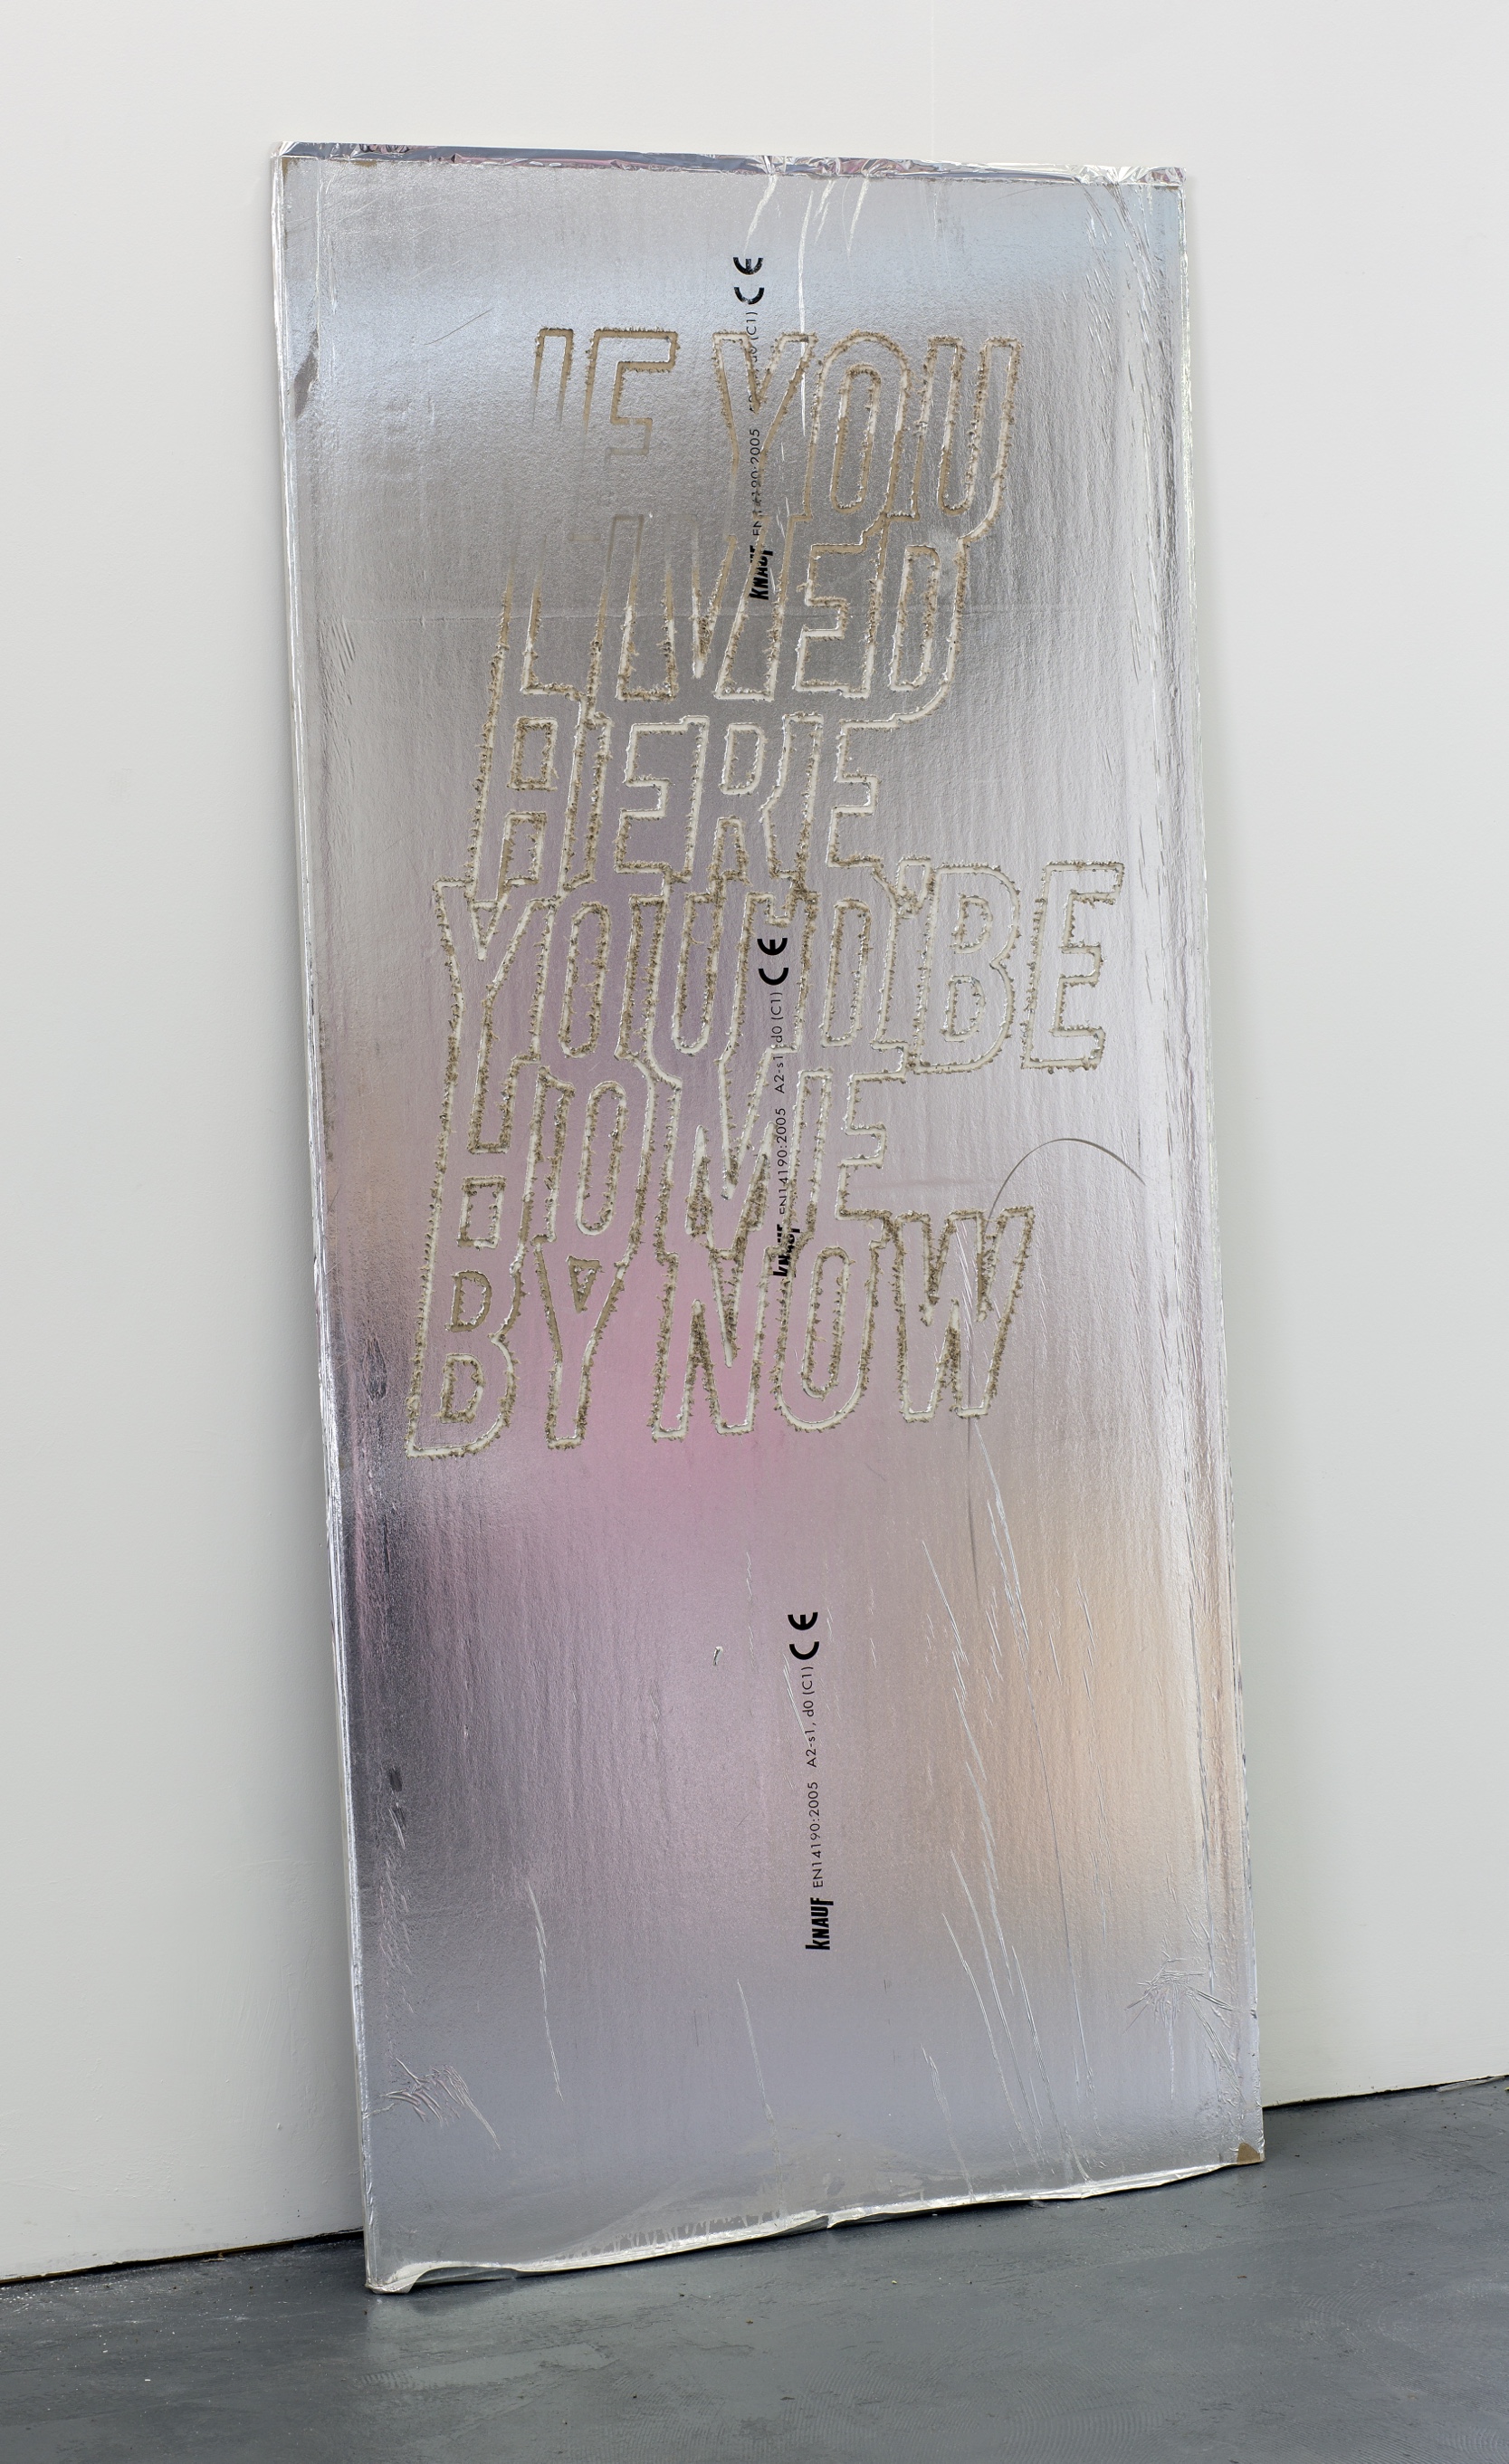 If you lived here, you’d be home by now, Camille Yvert, 2018